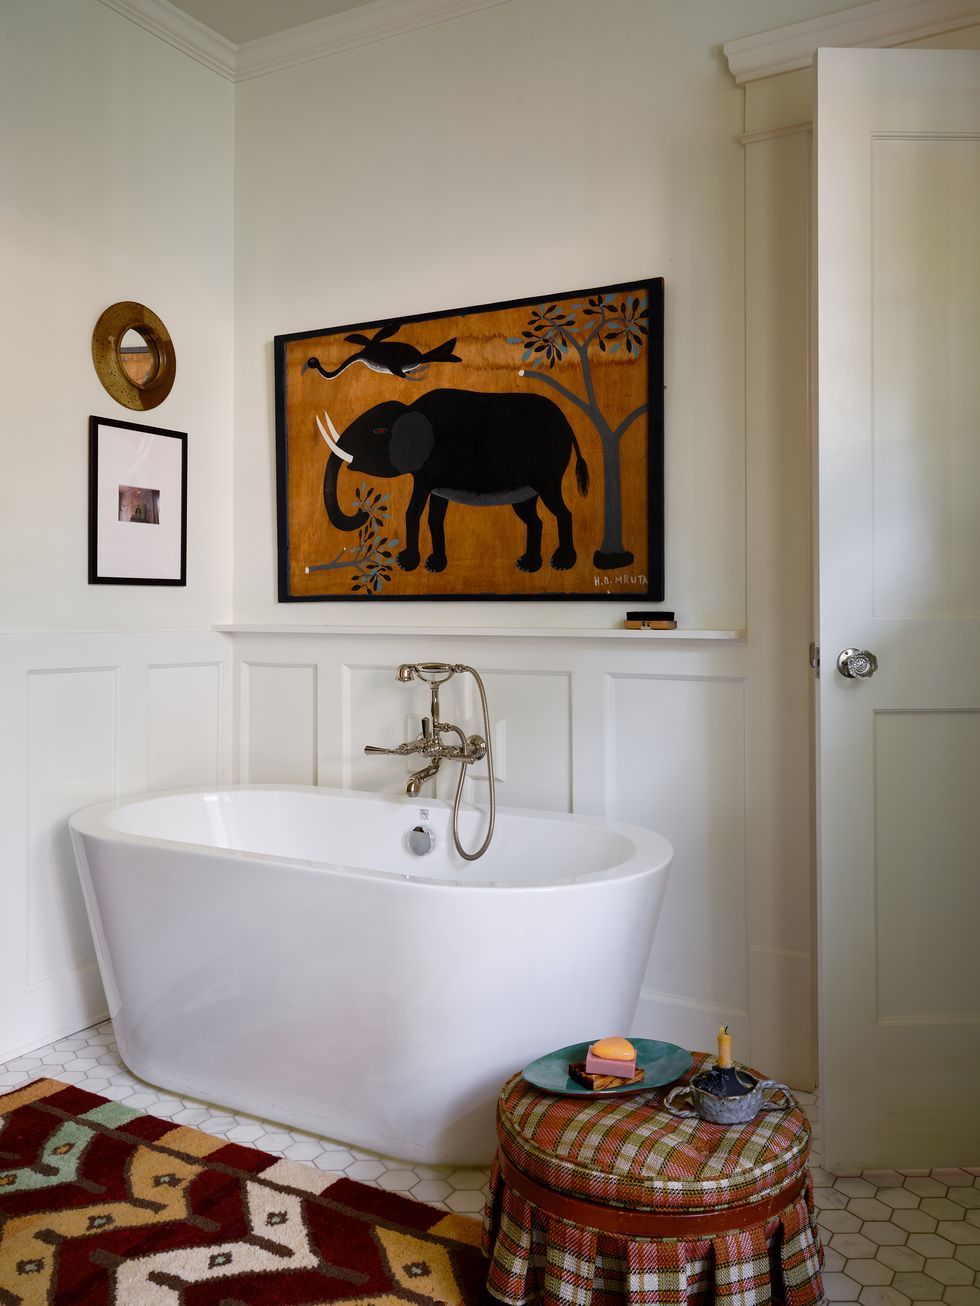 10 great bathroom storage ideas and trends - The Interiors Addict